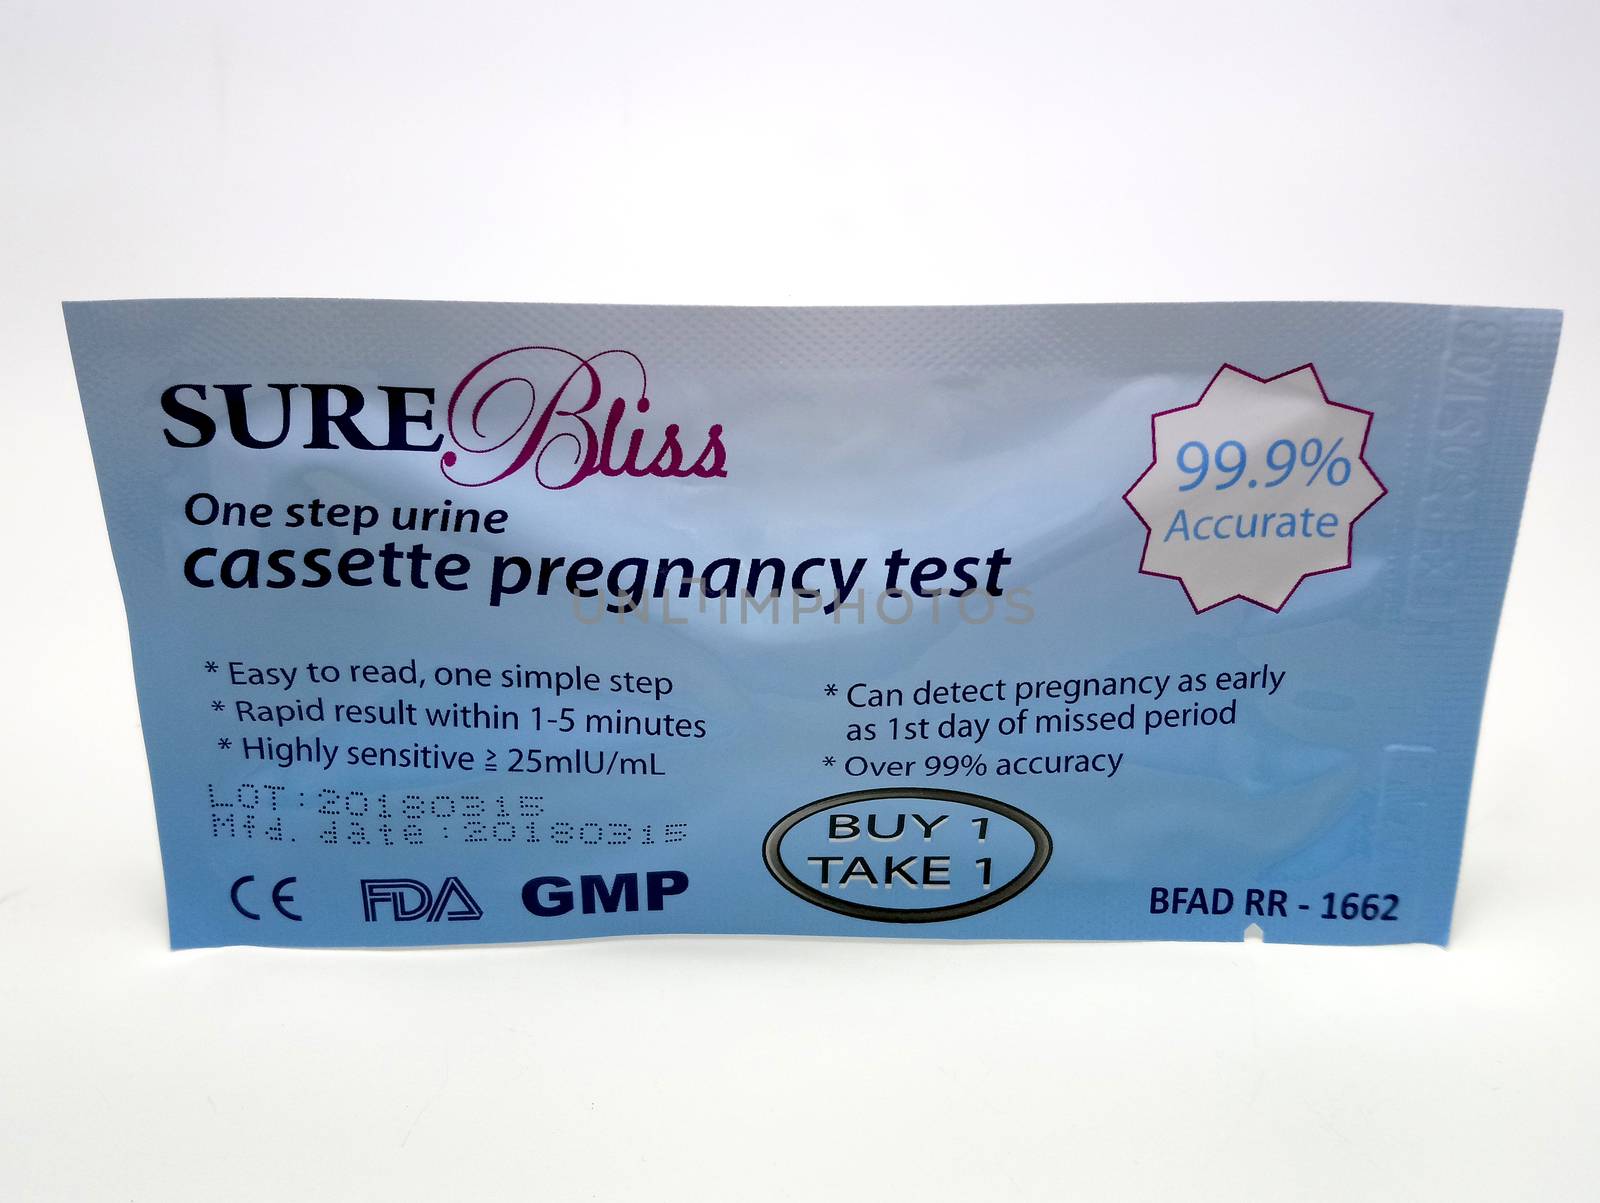 Sure bliss cassette pregnancy test in Manila, Philippines by imwaltersy